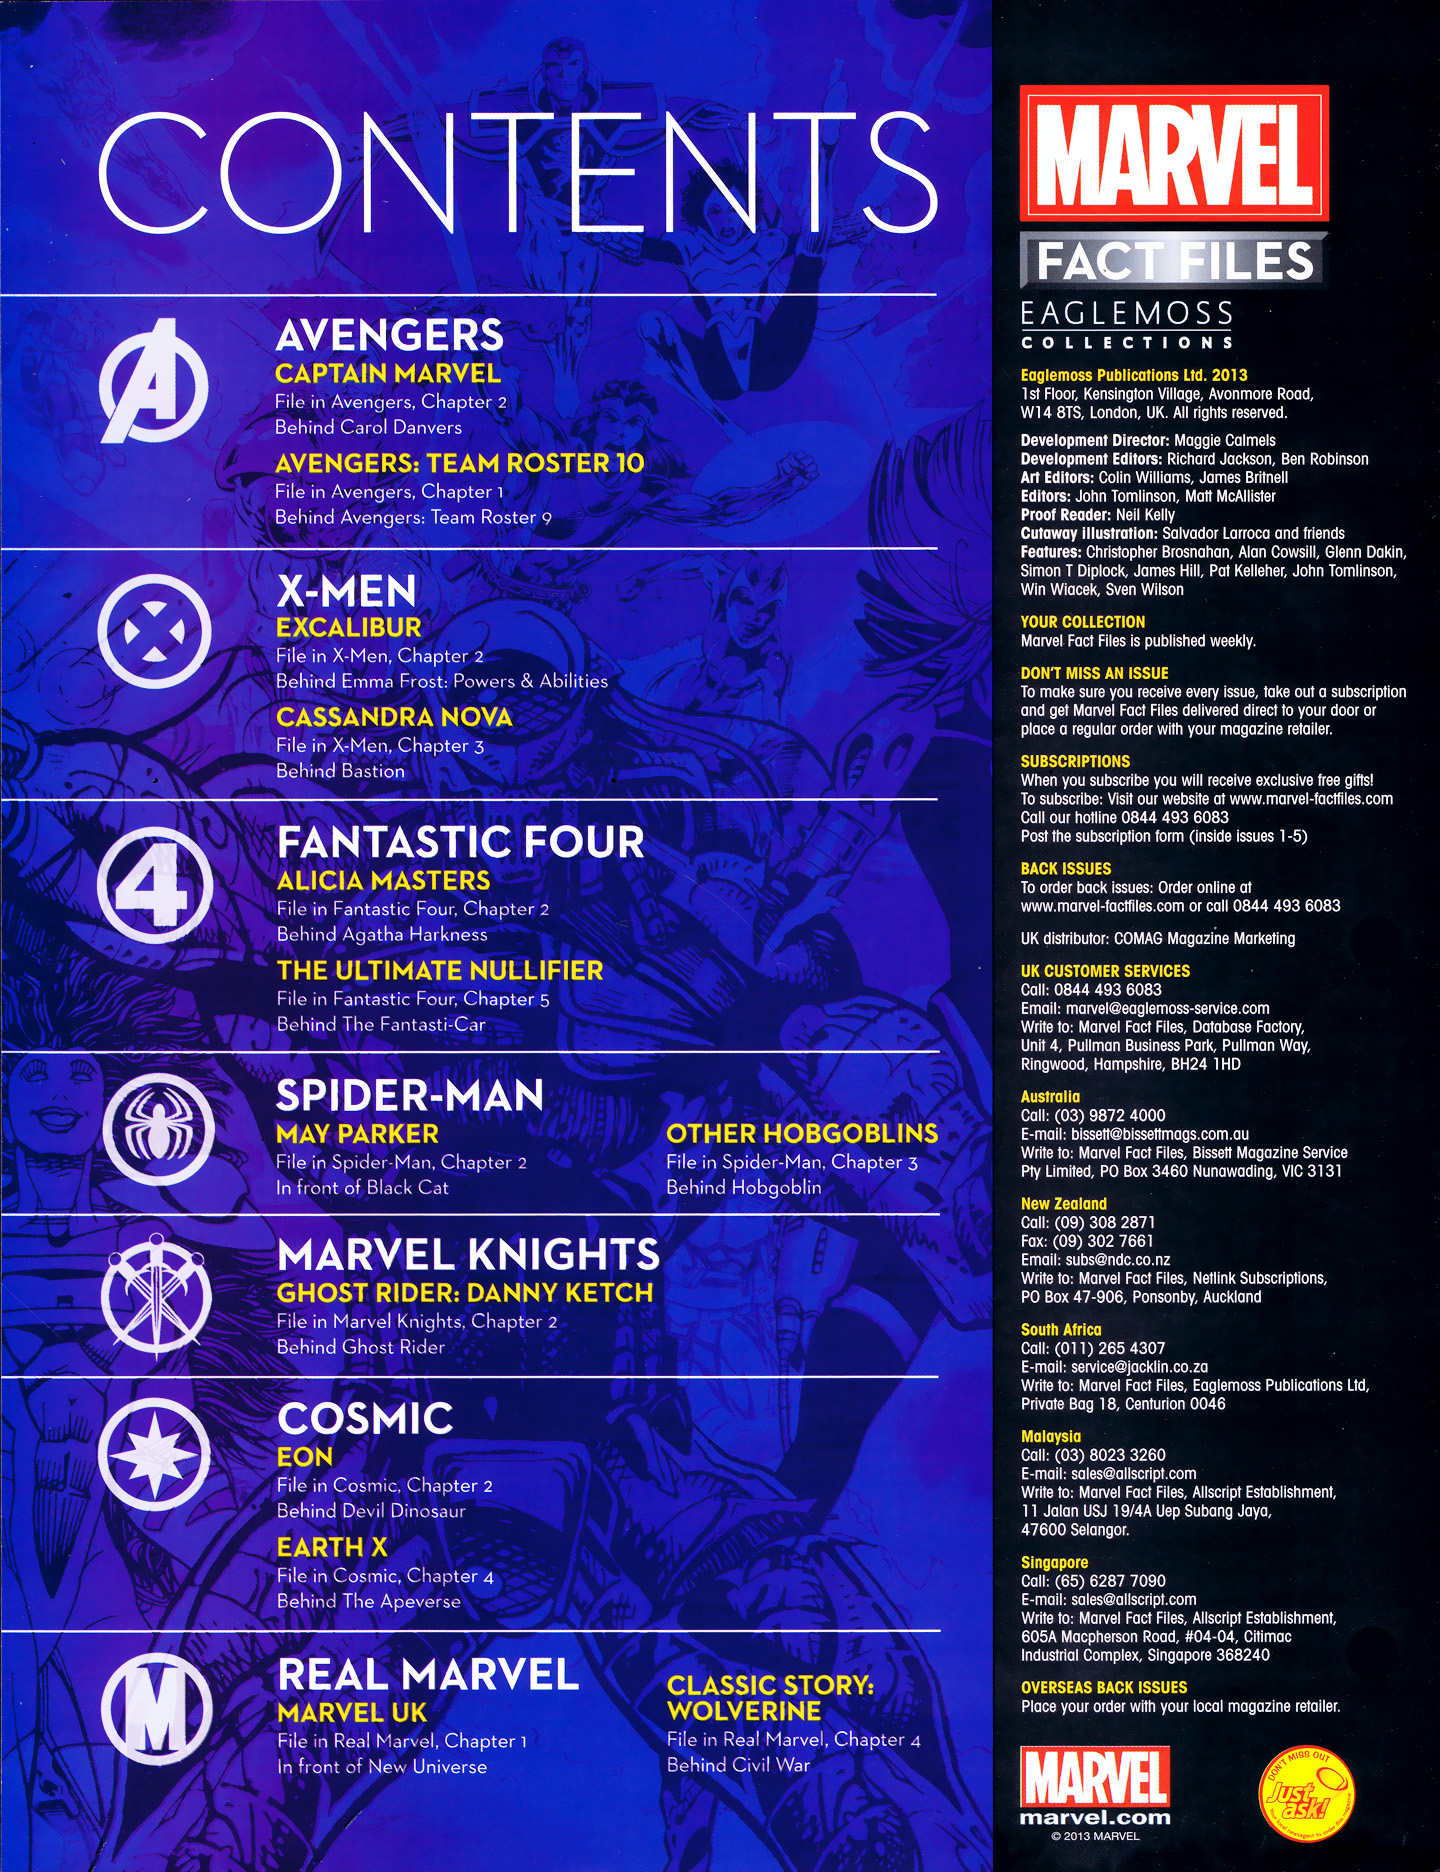 Read online Marvel Fact Files comic -  Issue #37 - 3